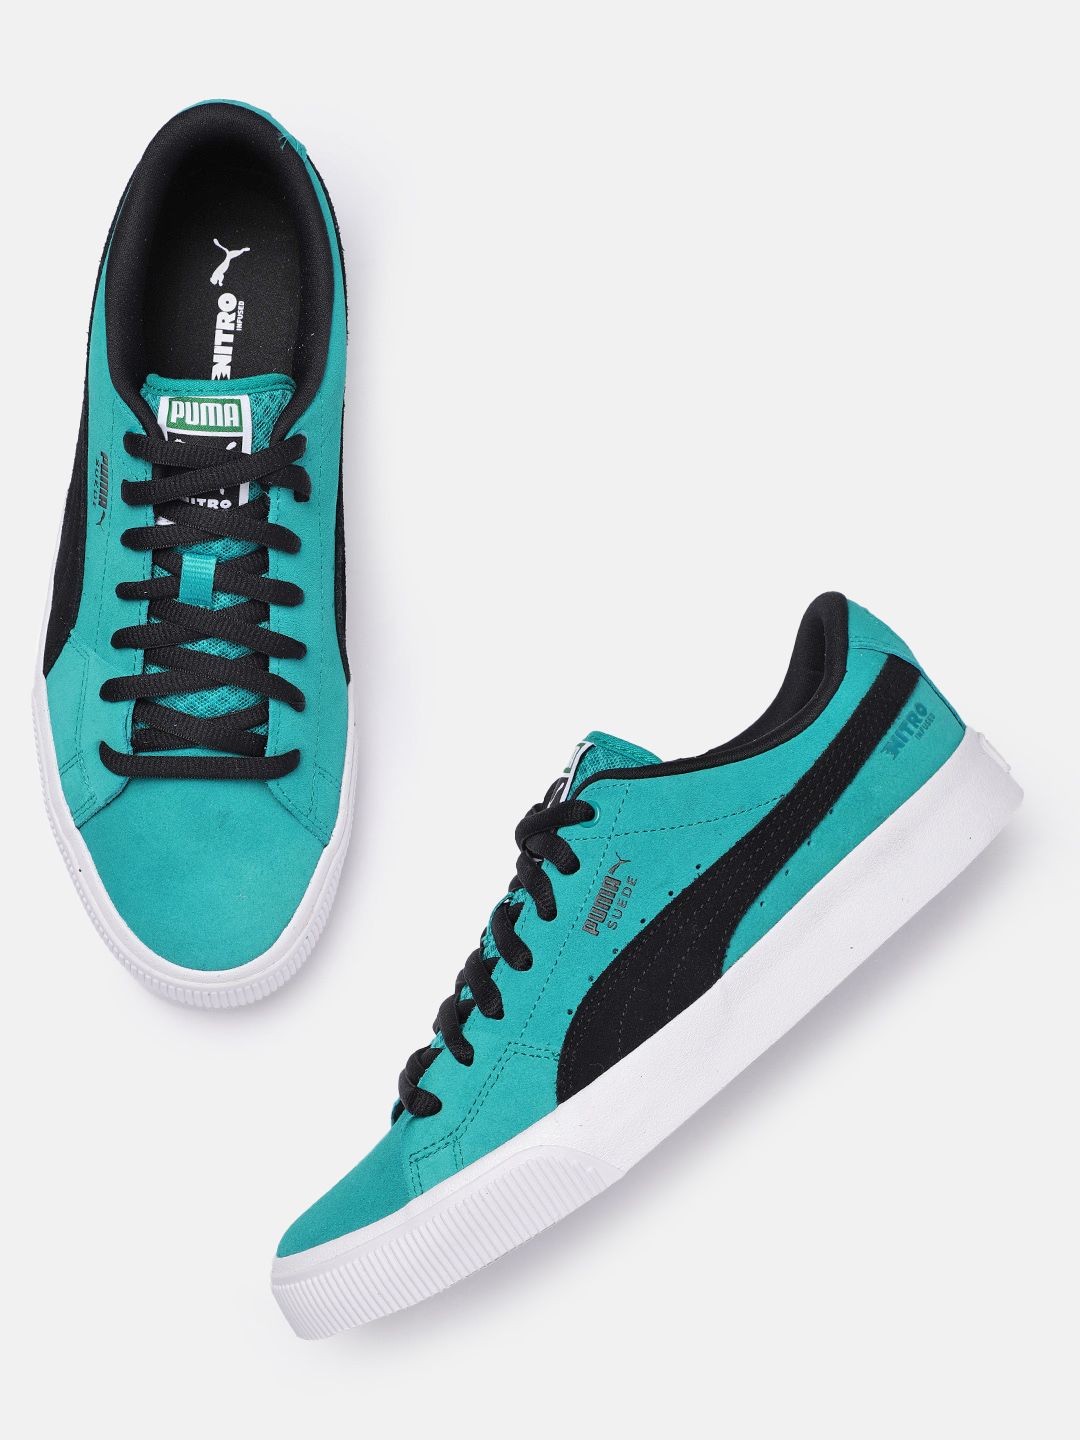 Puma Unisex Teal Green Solid Leather Skate Shoes Price in India